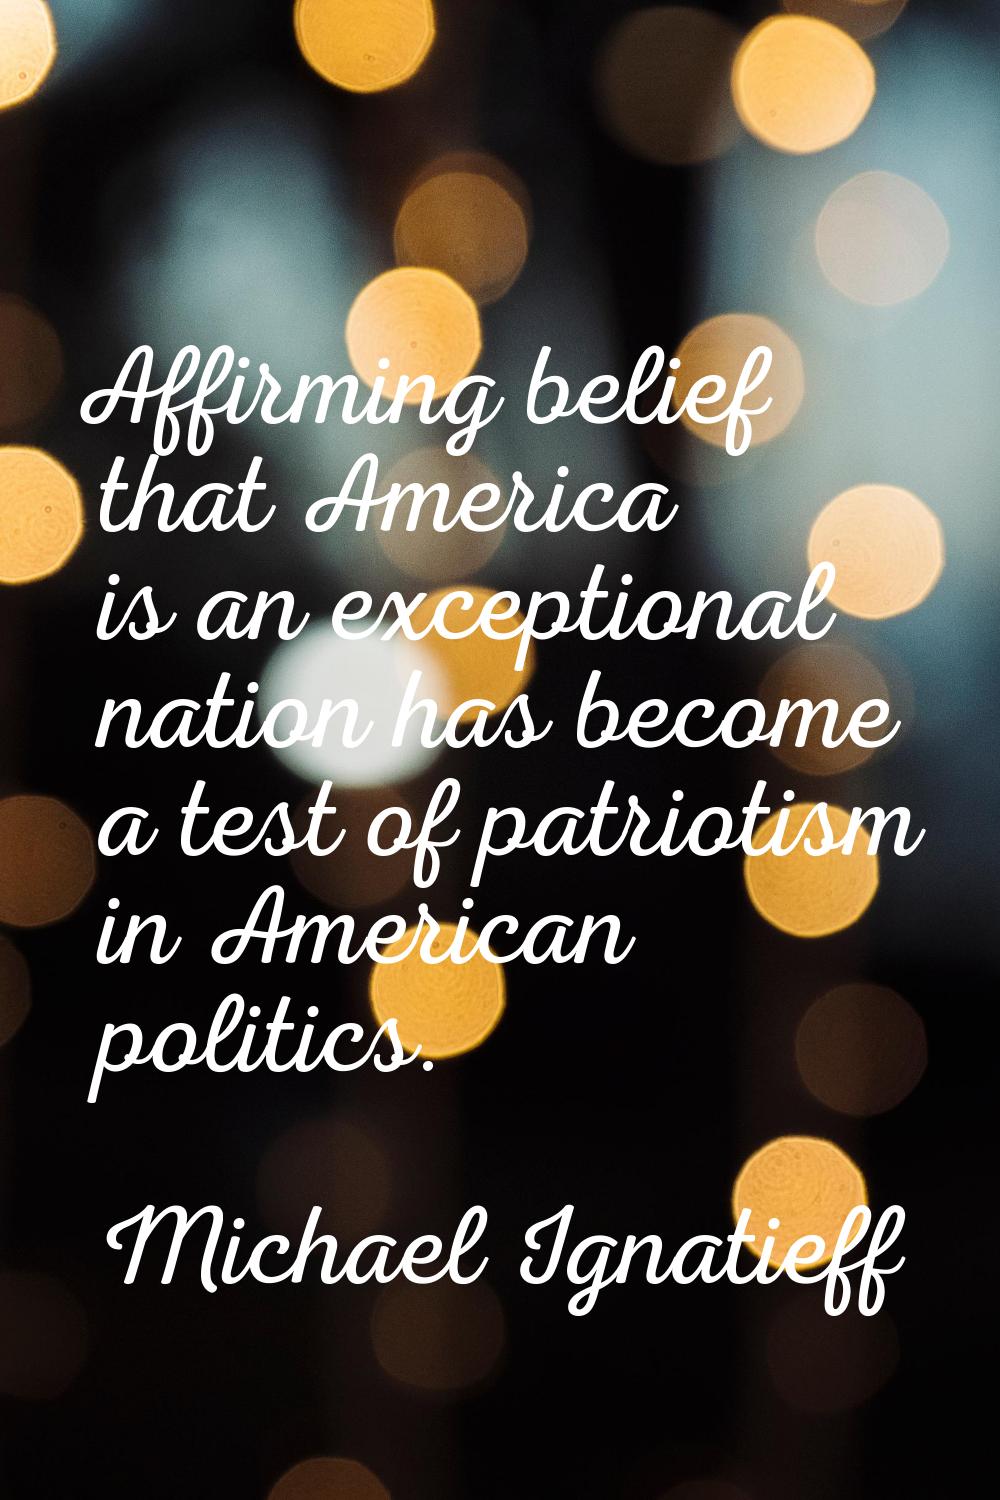 Affirming belief that America is an exceptional nation has become a test of patriotism in American 